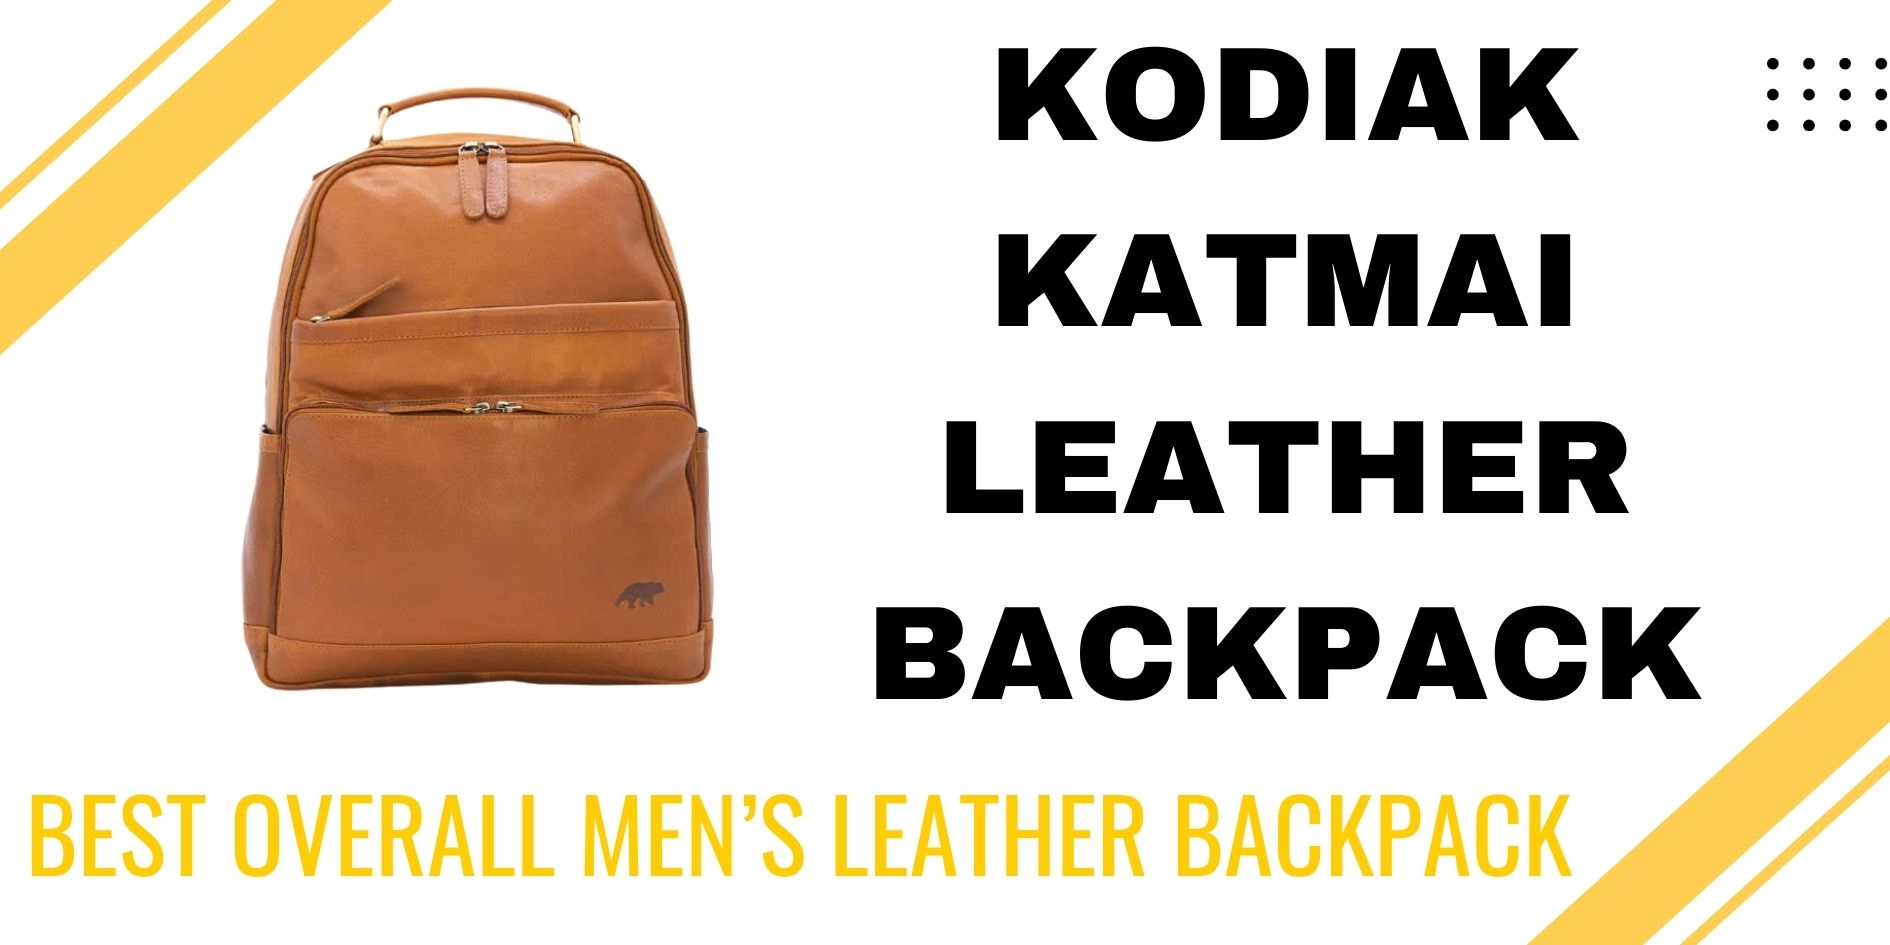 Best Overall Men’s Leather Backpack